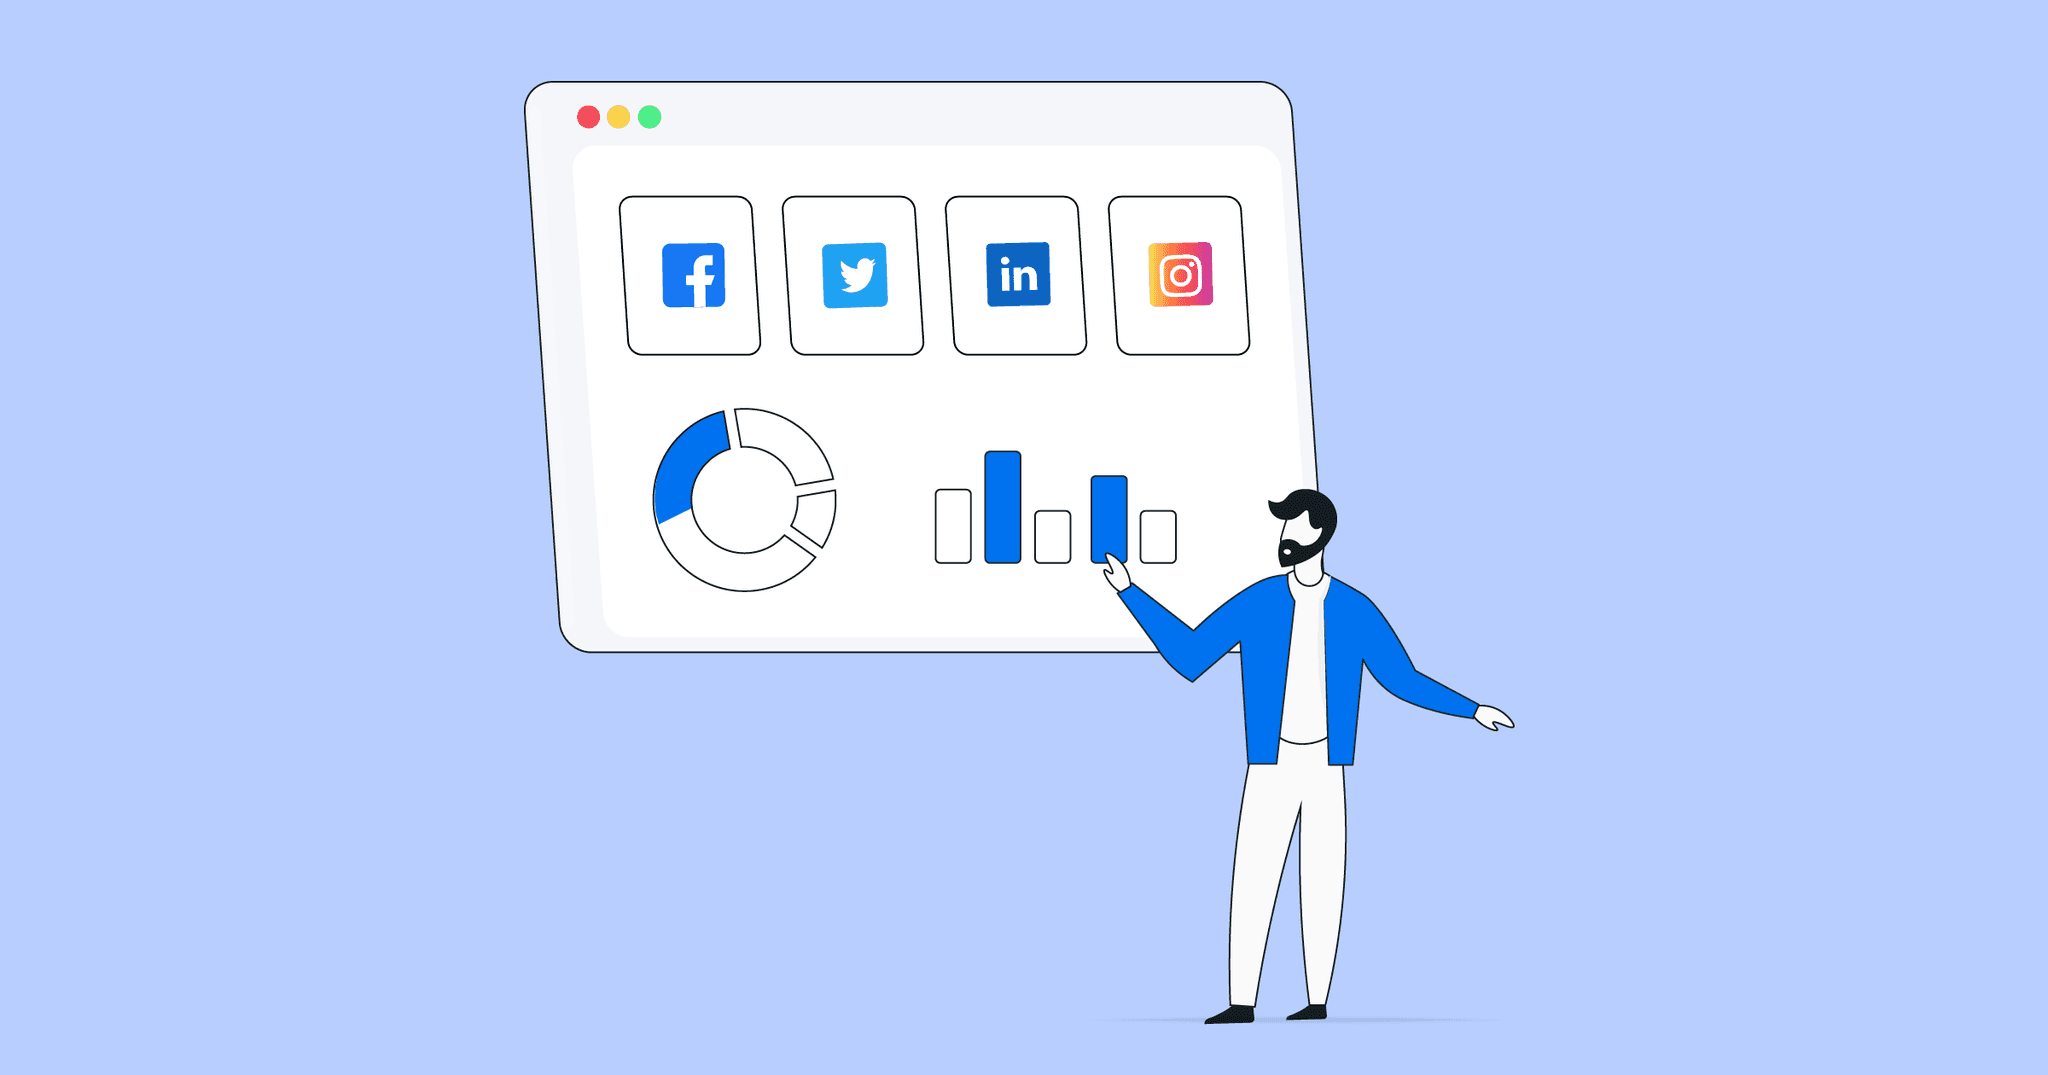 How to Build a Social Media Reporting Dashboard